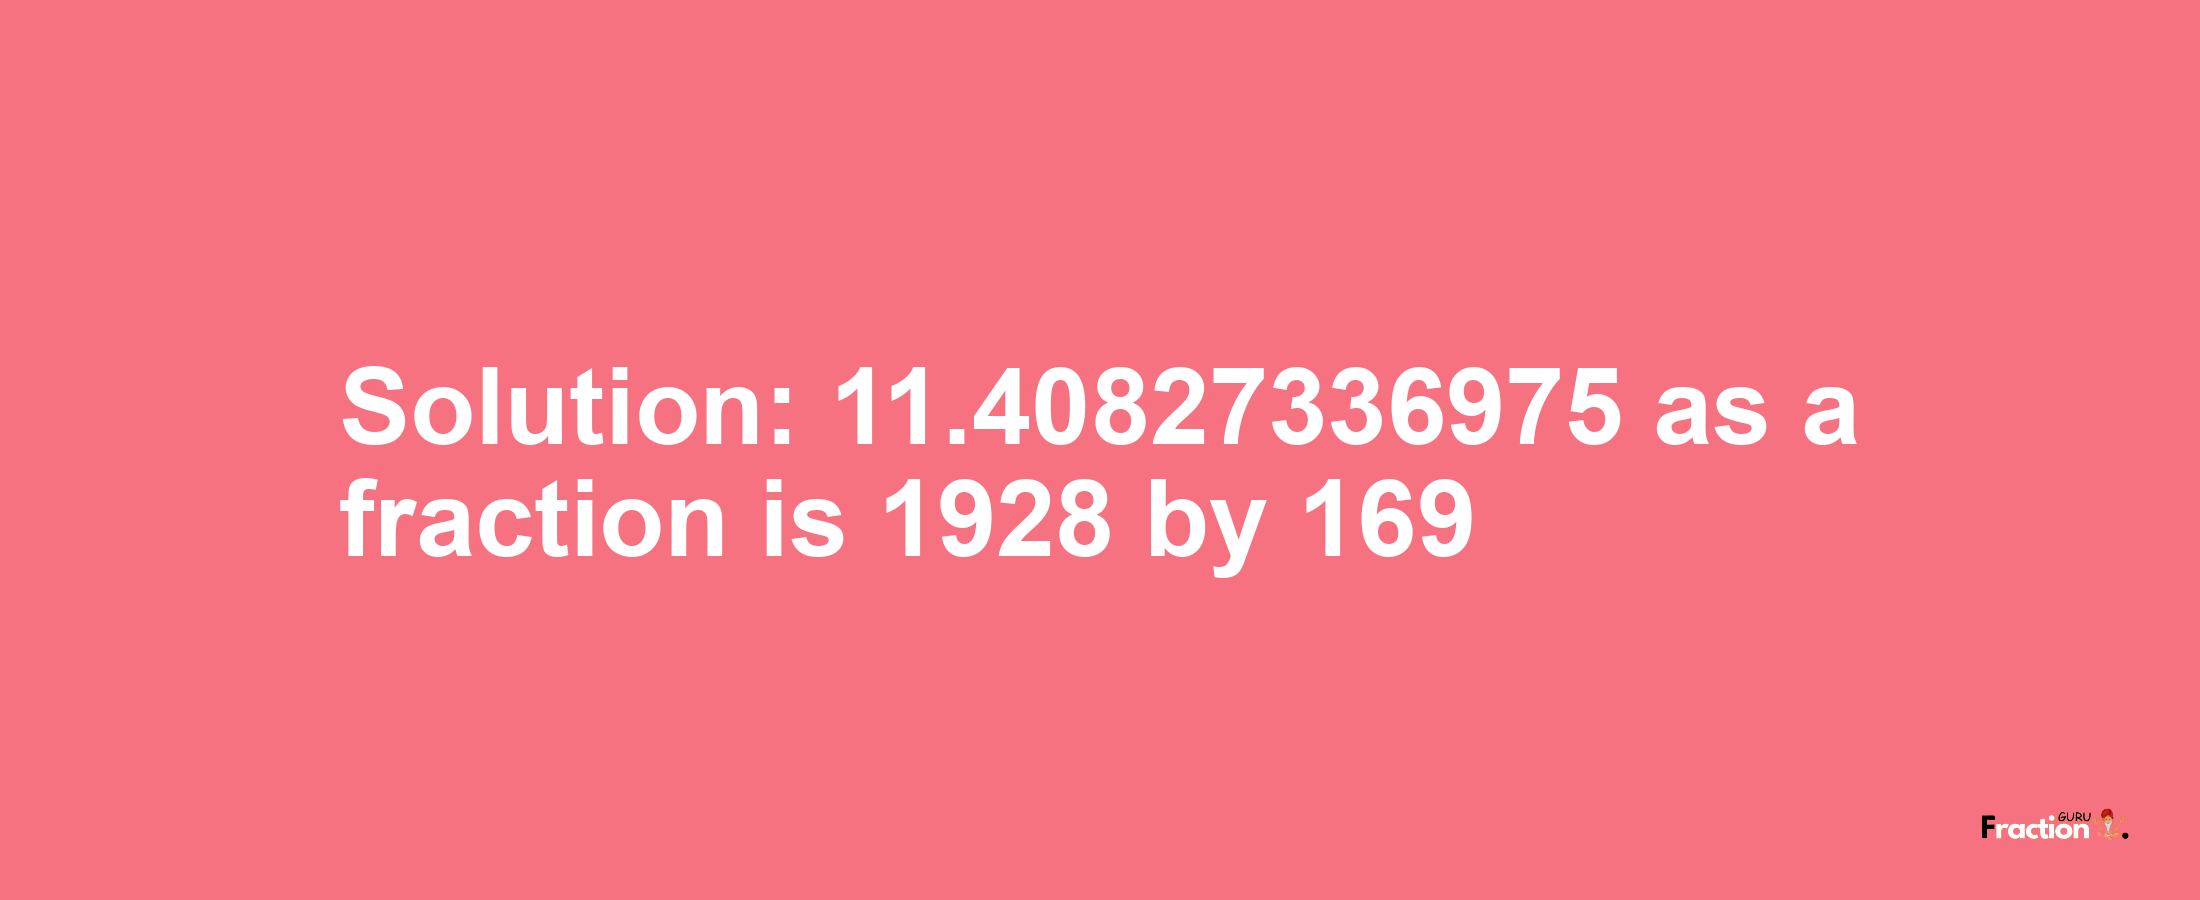 Solution:11.40827336975 as a fraction is 1928/169